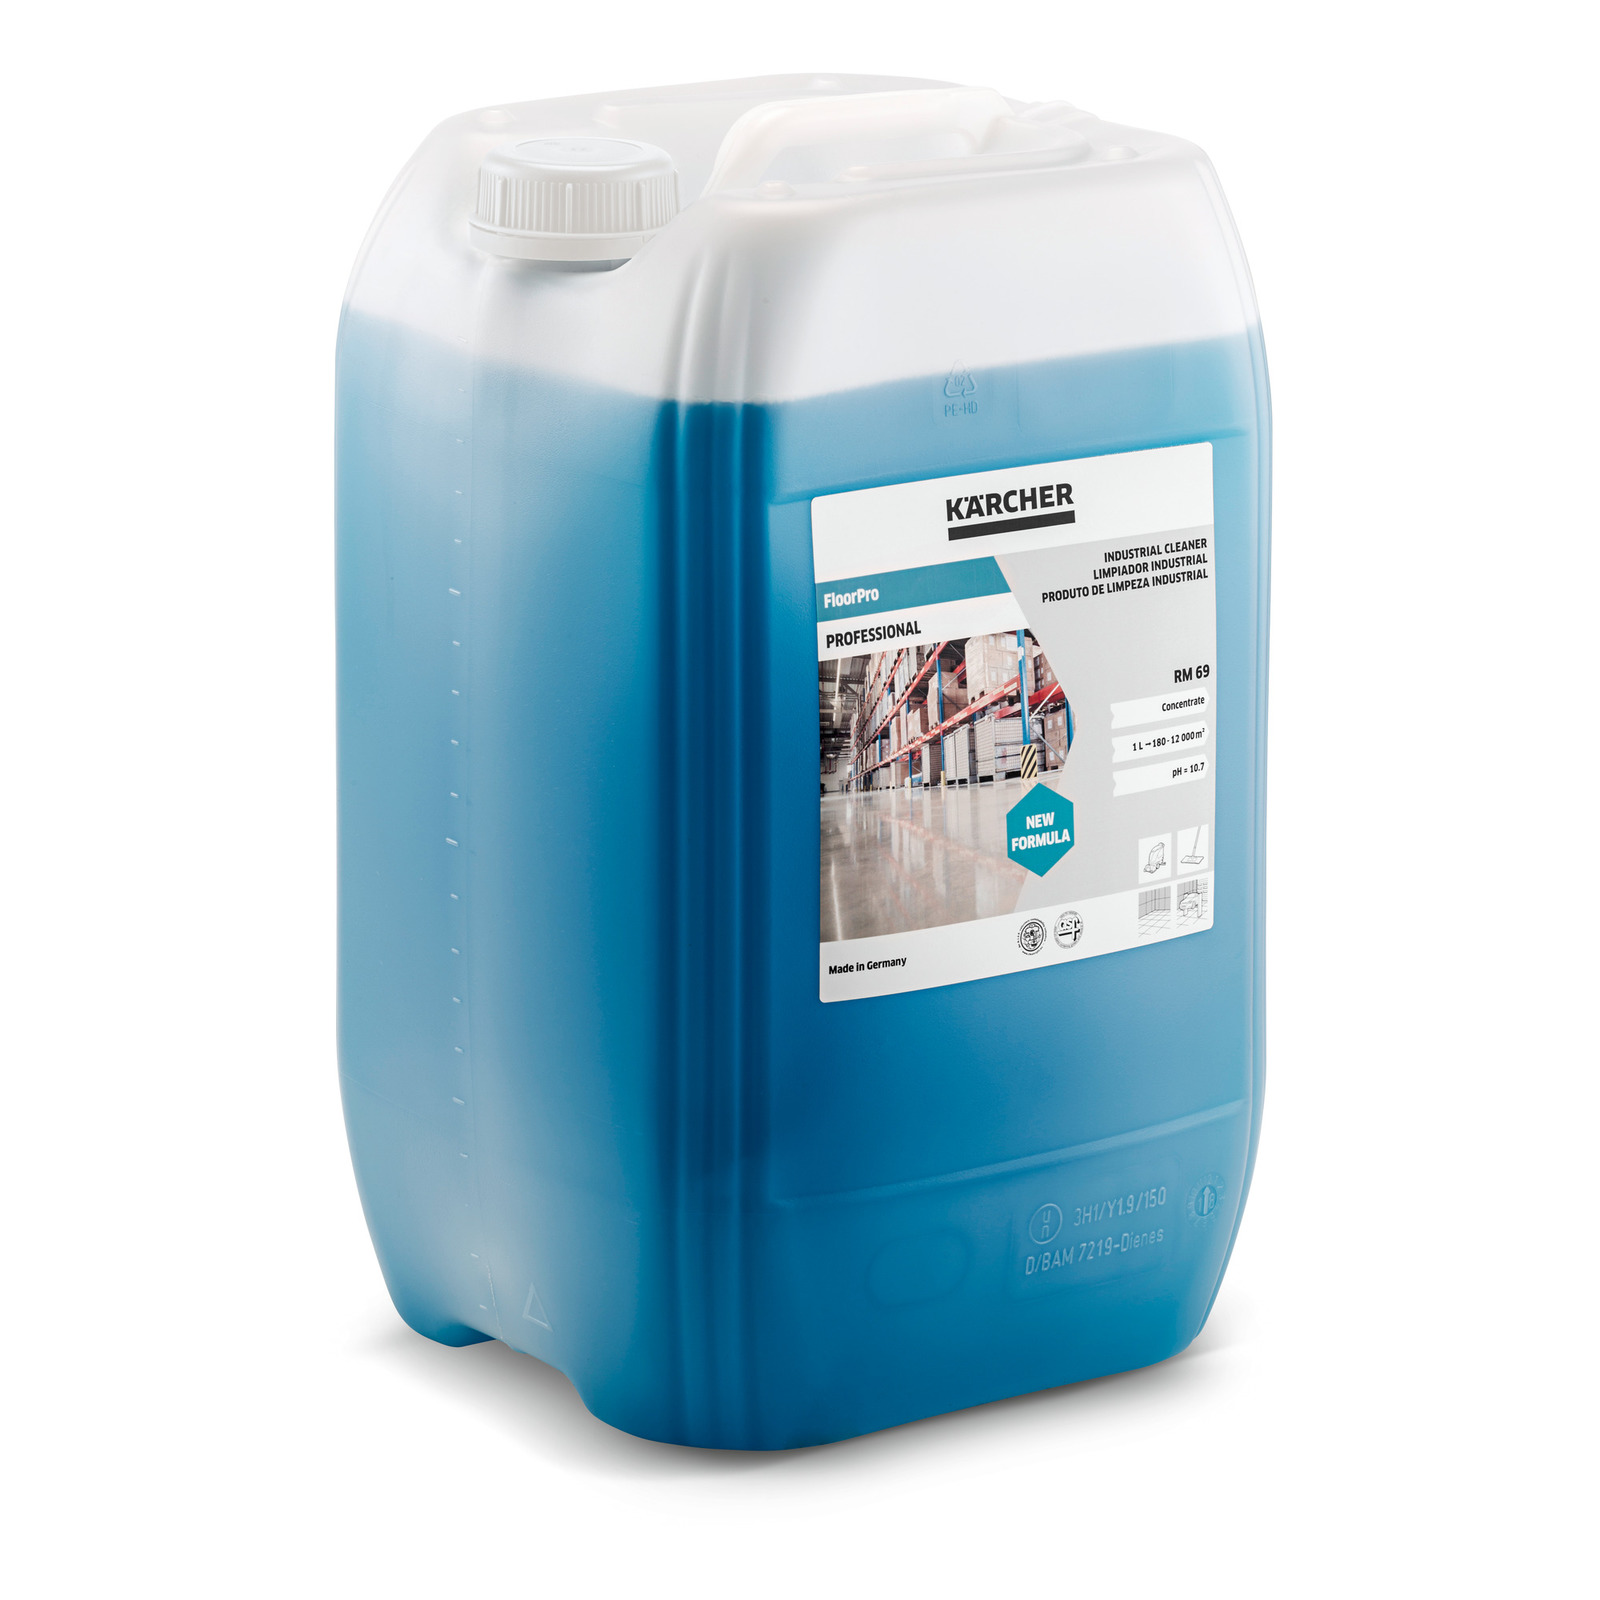 Rm 69** 20l industrial cleaner